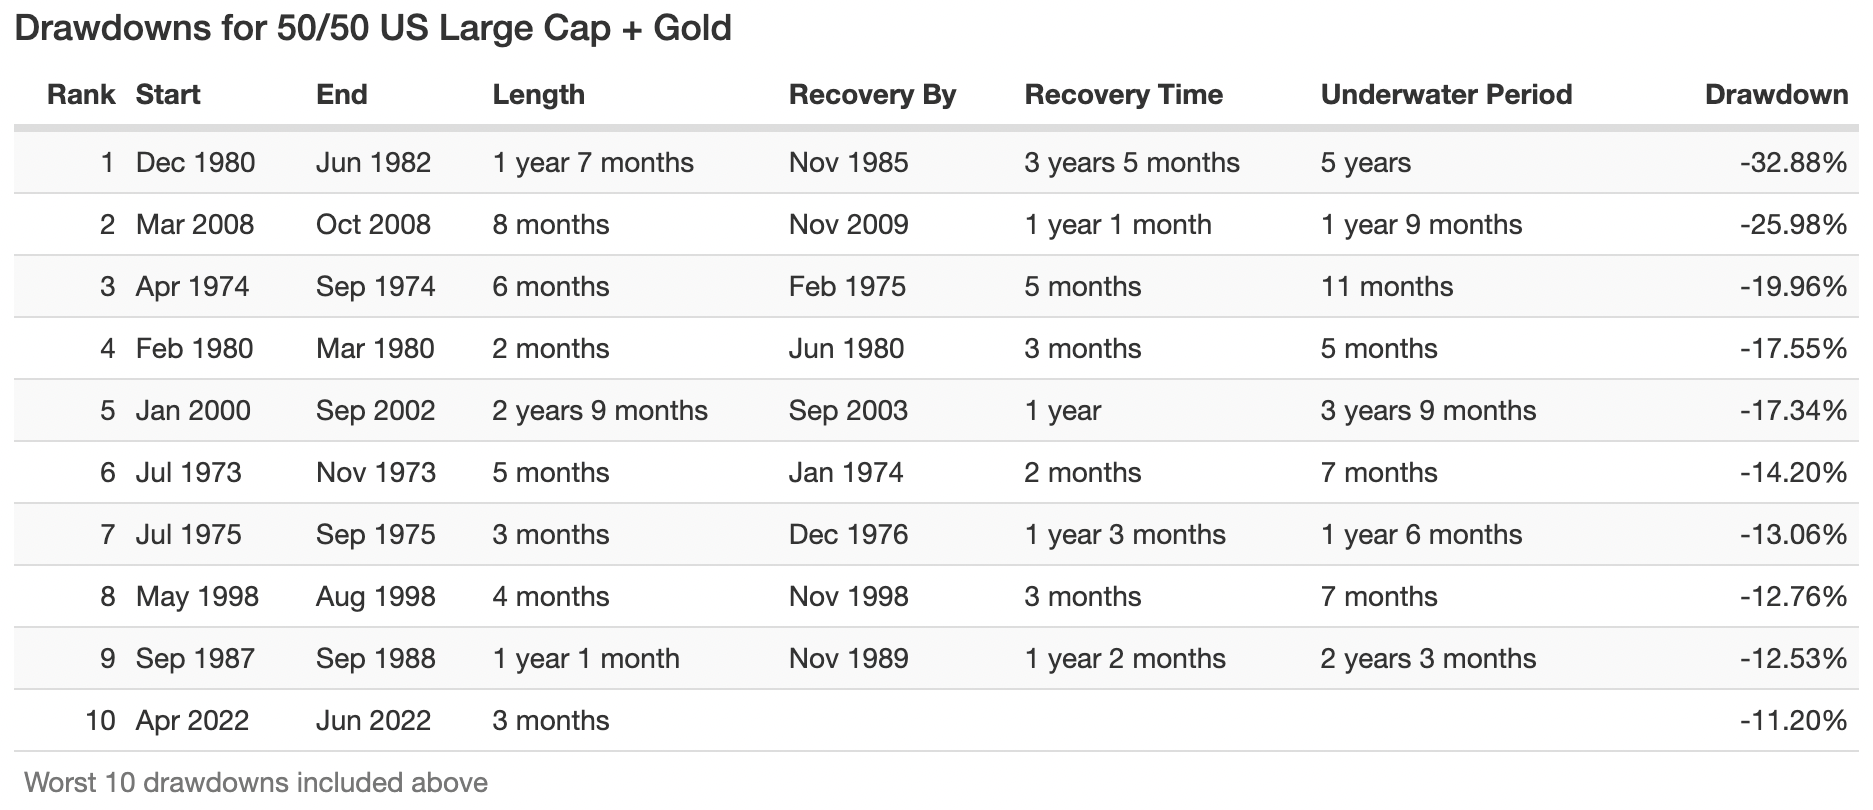 Worst Drawdowns for 50/50 US Large Cap + Gold since 1972